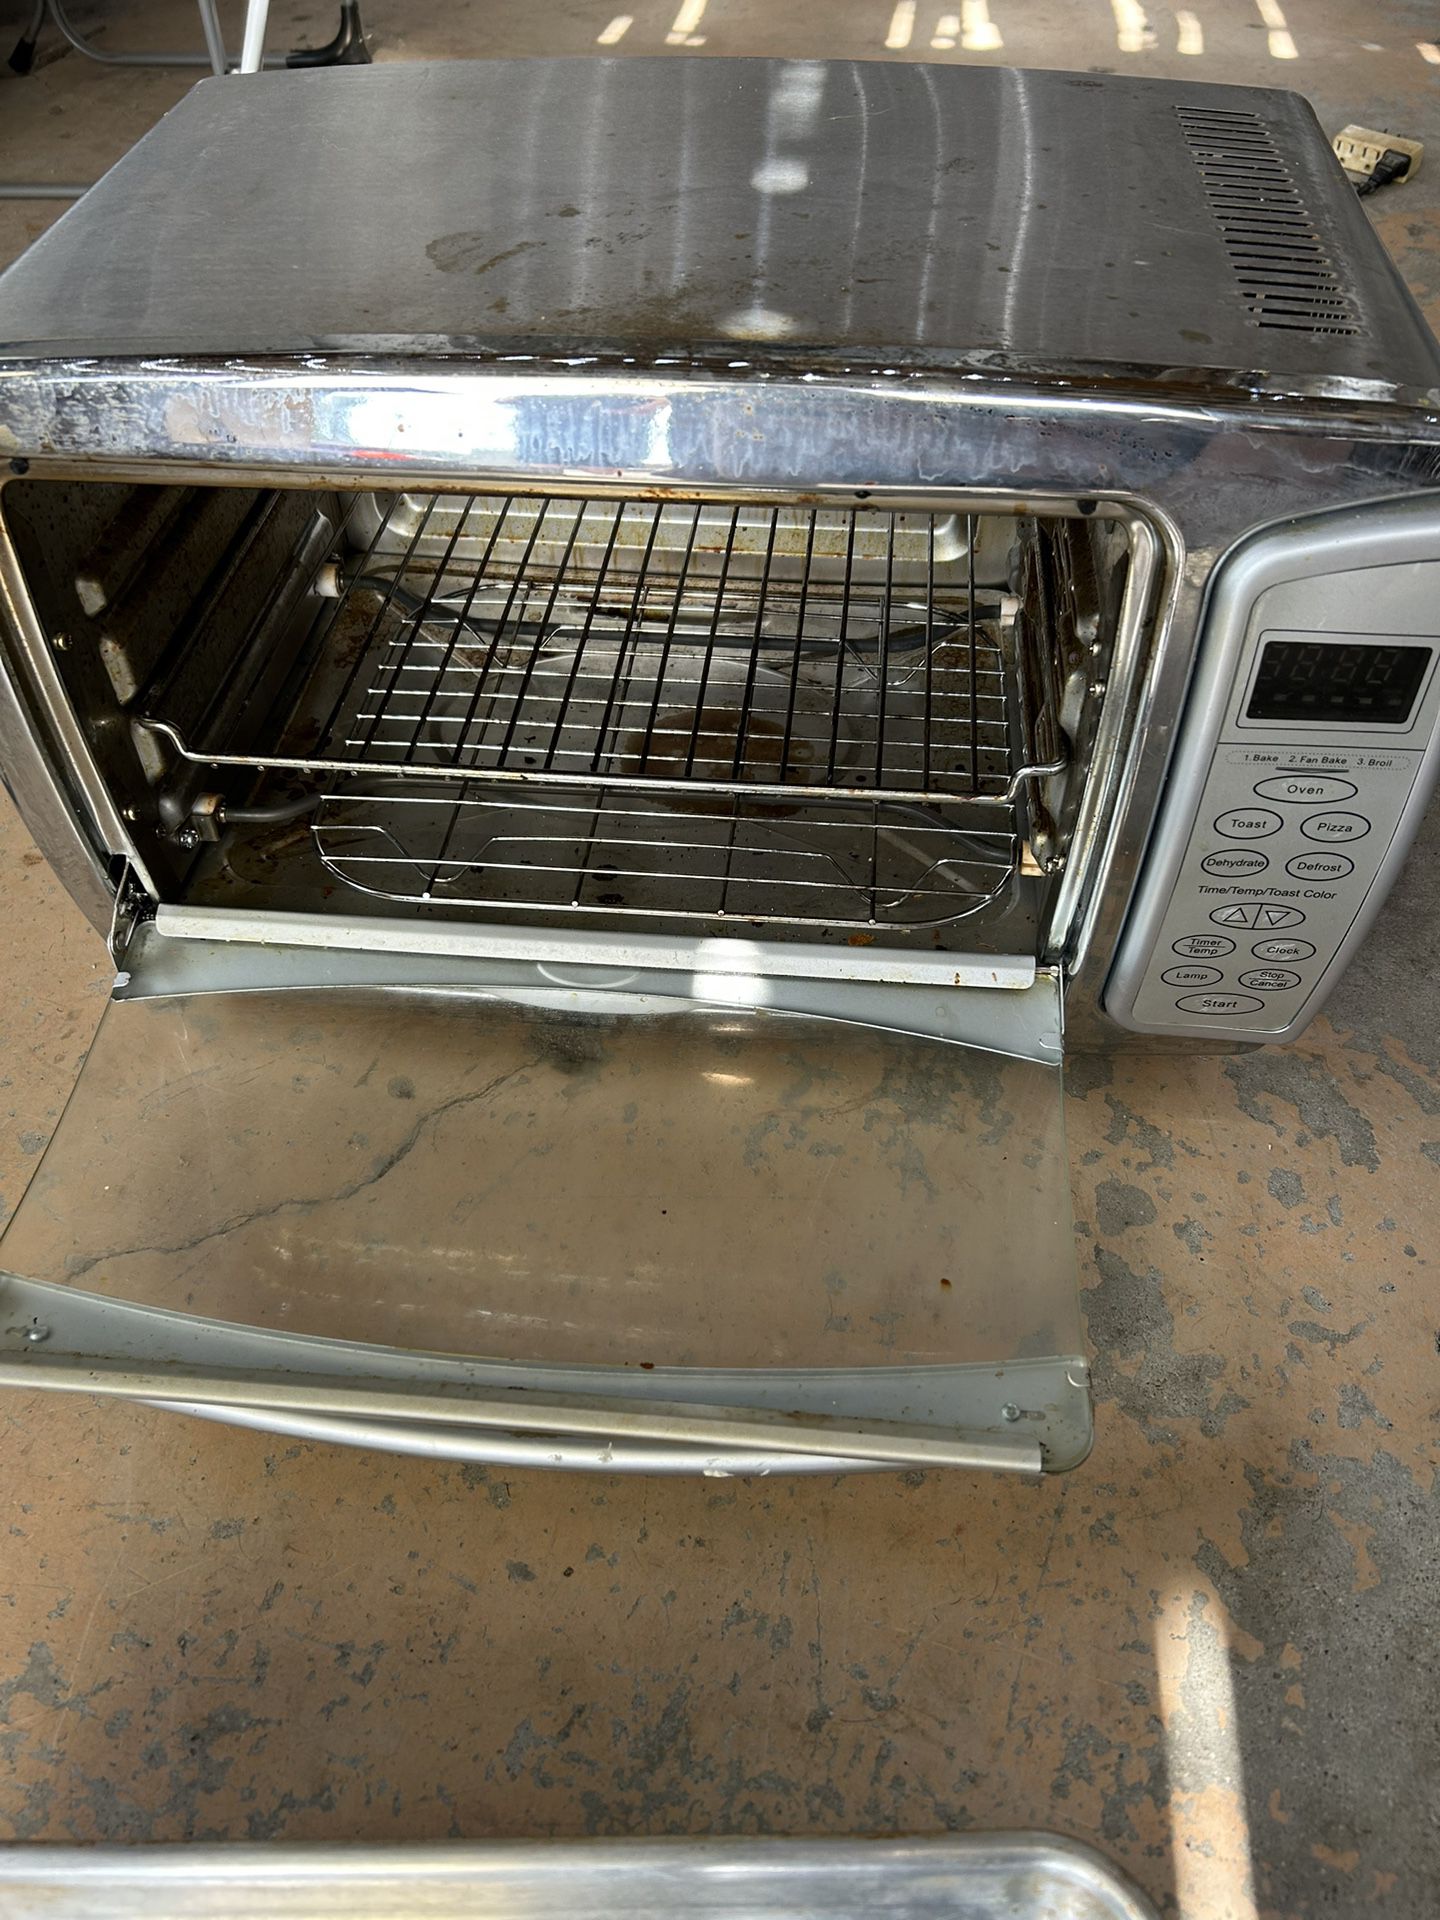 GE toaster Oven/ Broiler for Sale in Corona, CA - OfferUp